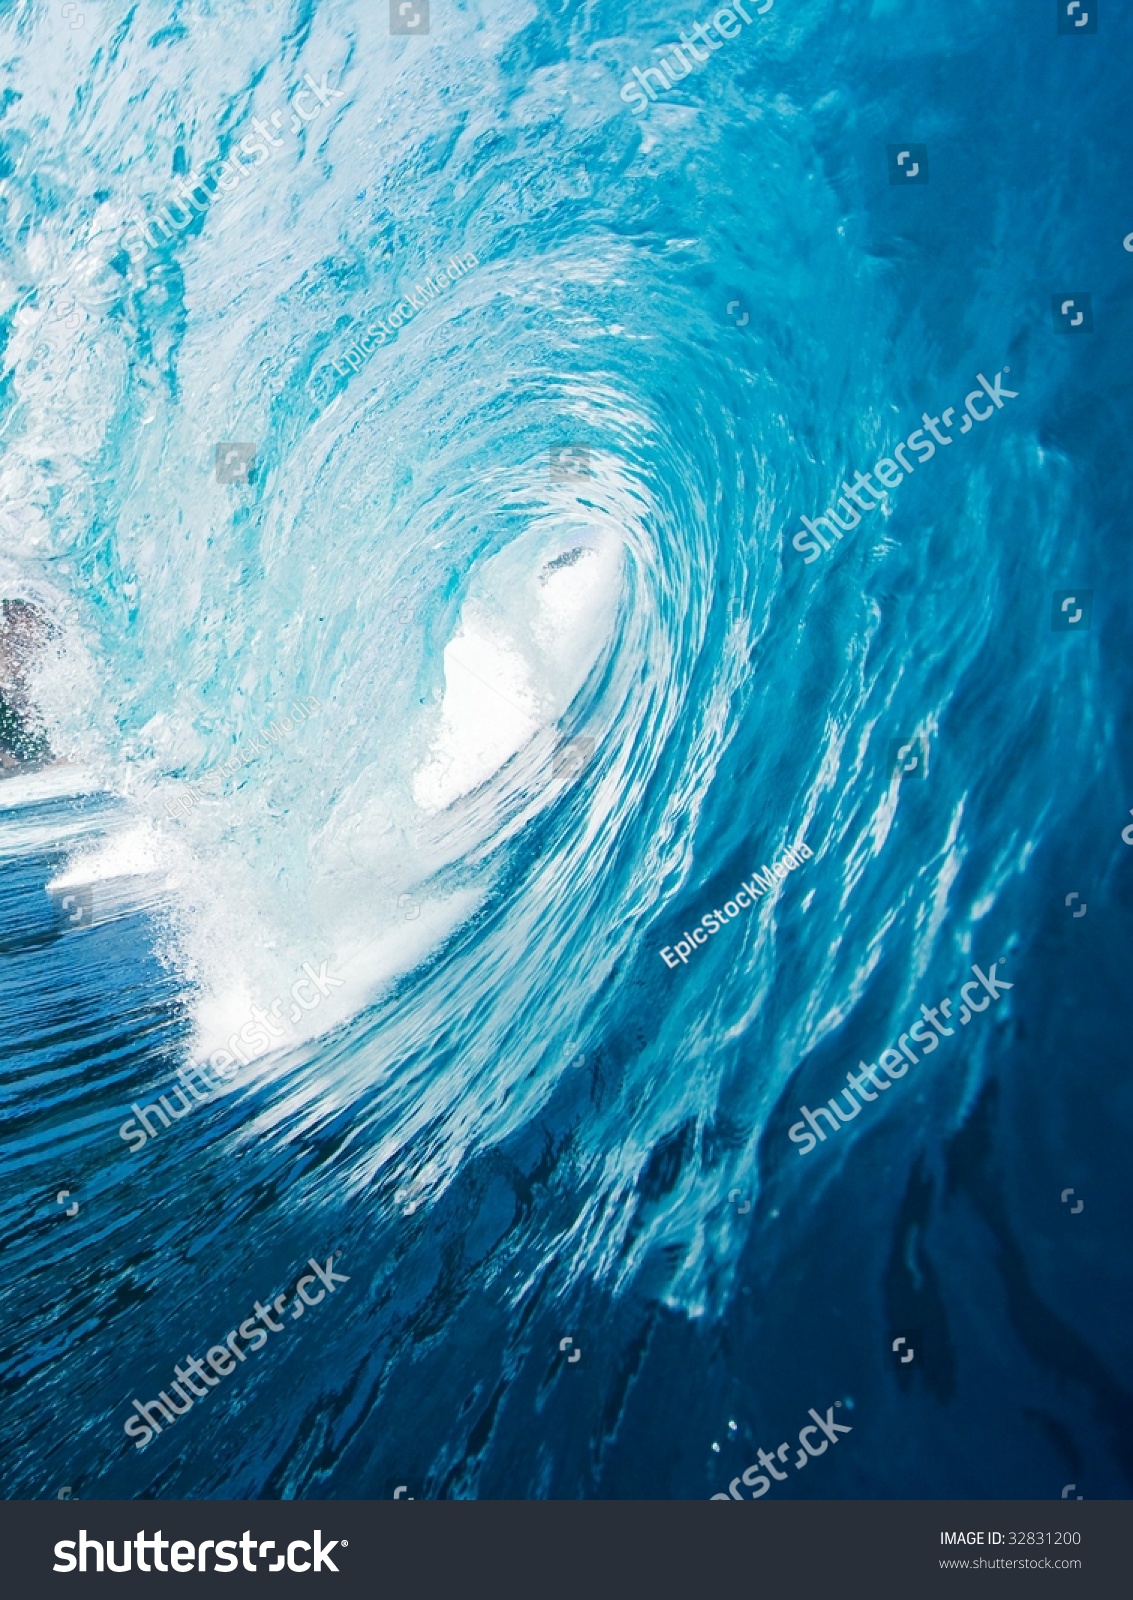 Epic Surfing Wave #32831200